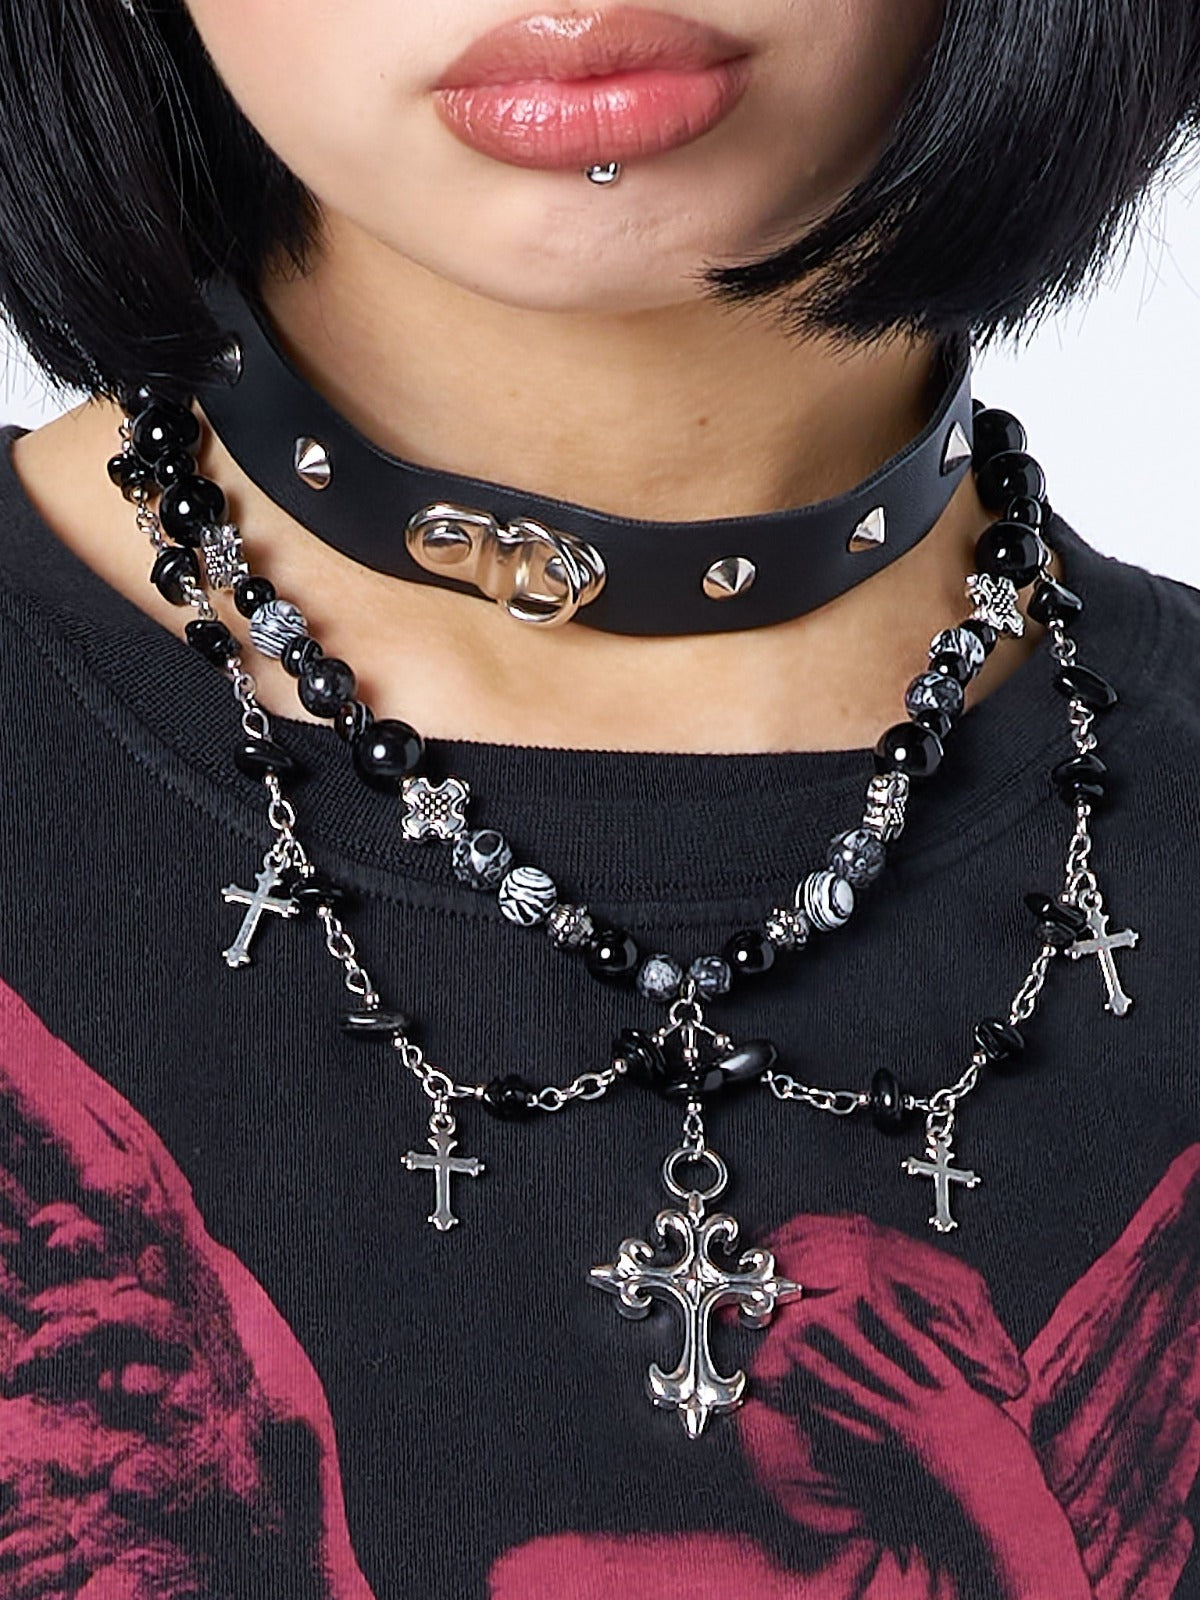 CResha Black Rosary Beads Chain Necklace Alloy Acrylic Cross Pendant for  Men and Women Metal Pendant Price in India - Buy CResha Black Rosary Beads  Chain Necklace Alloy Acrylic Cross Pendant for